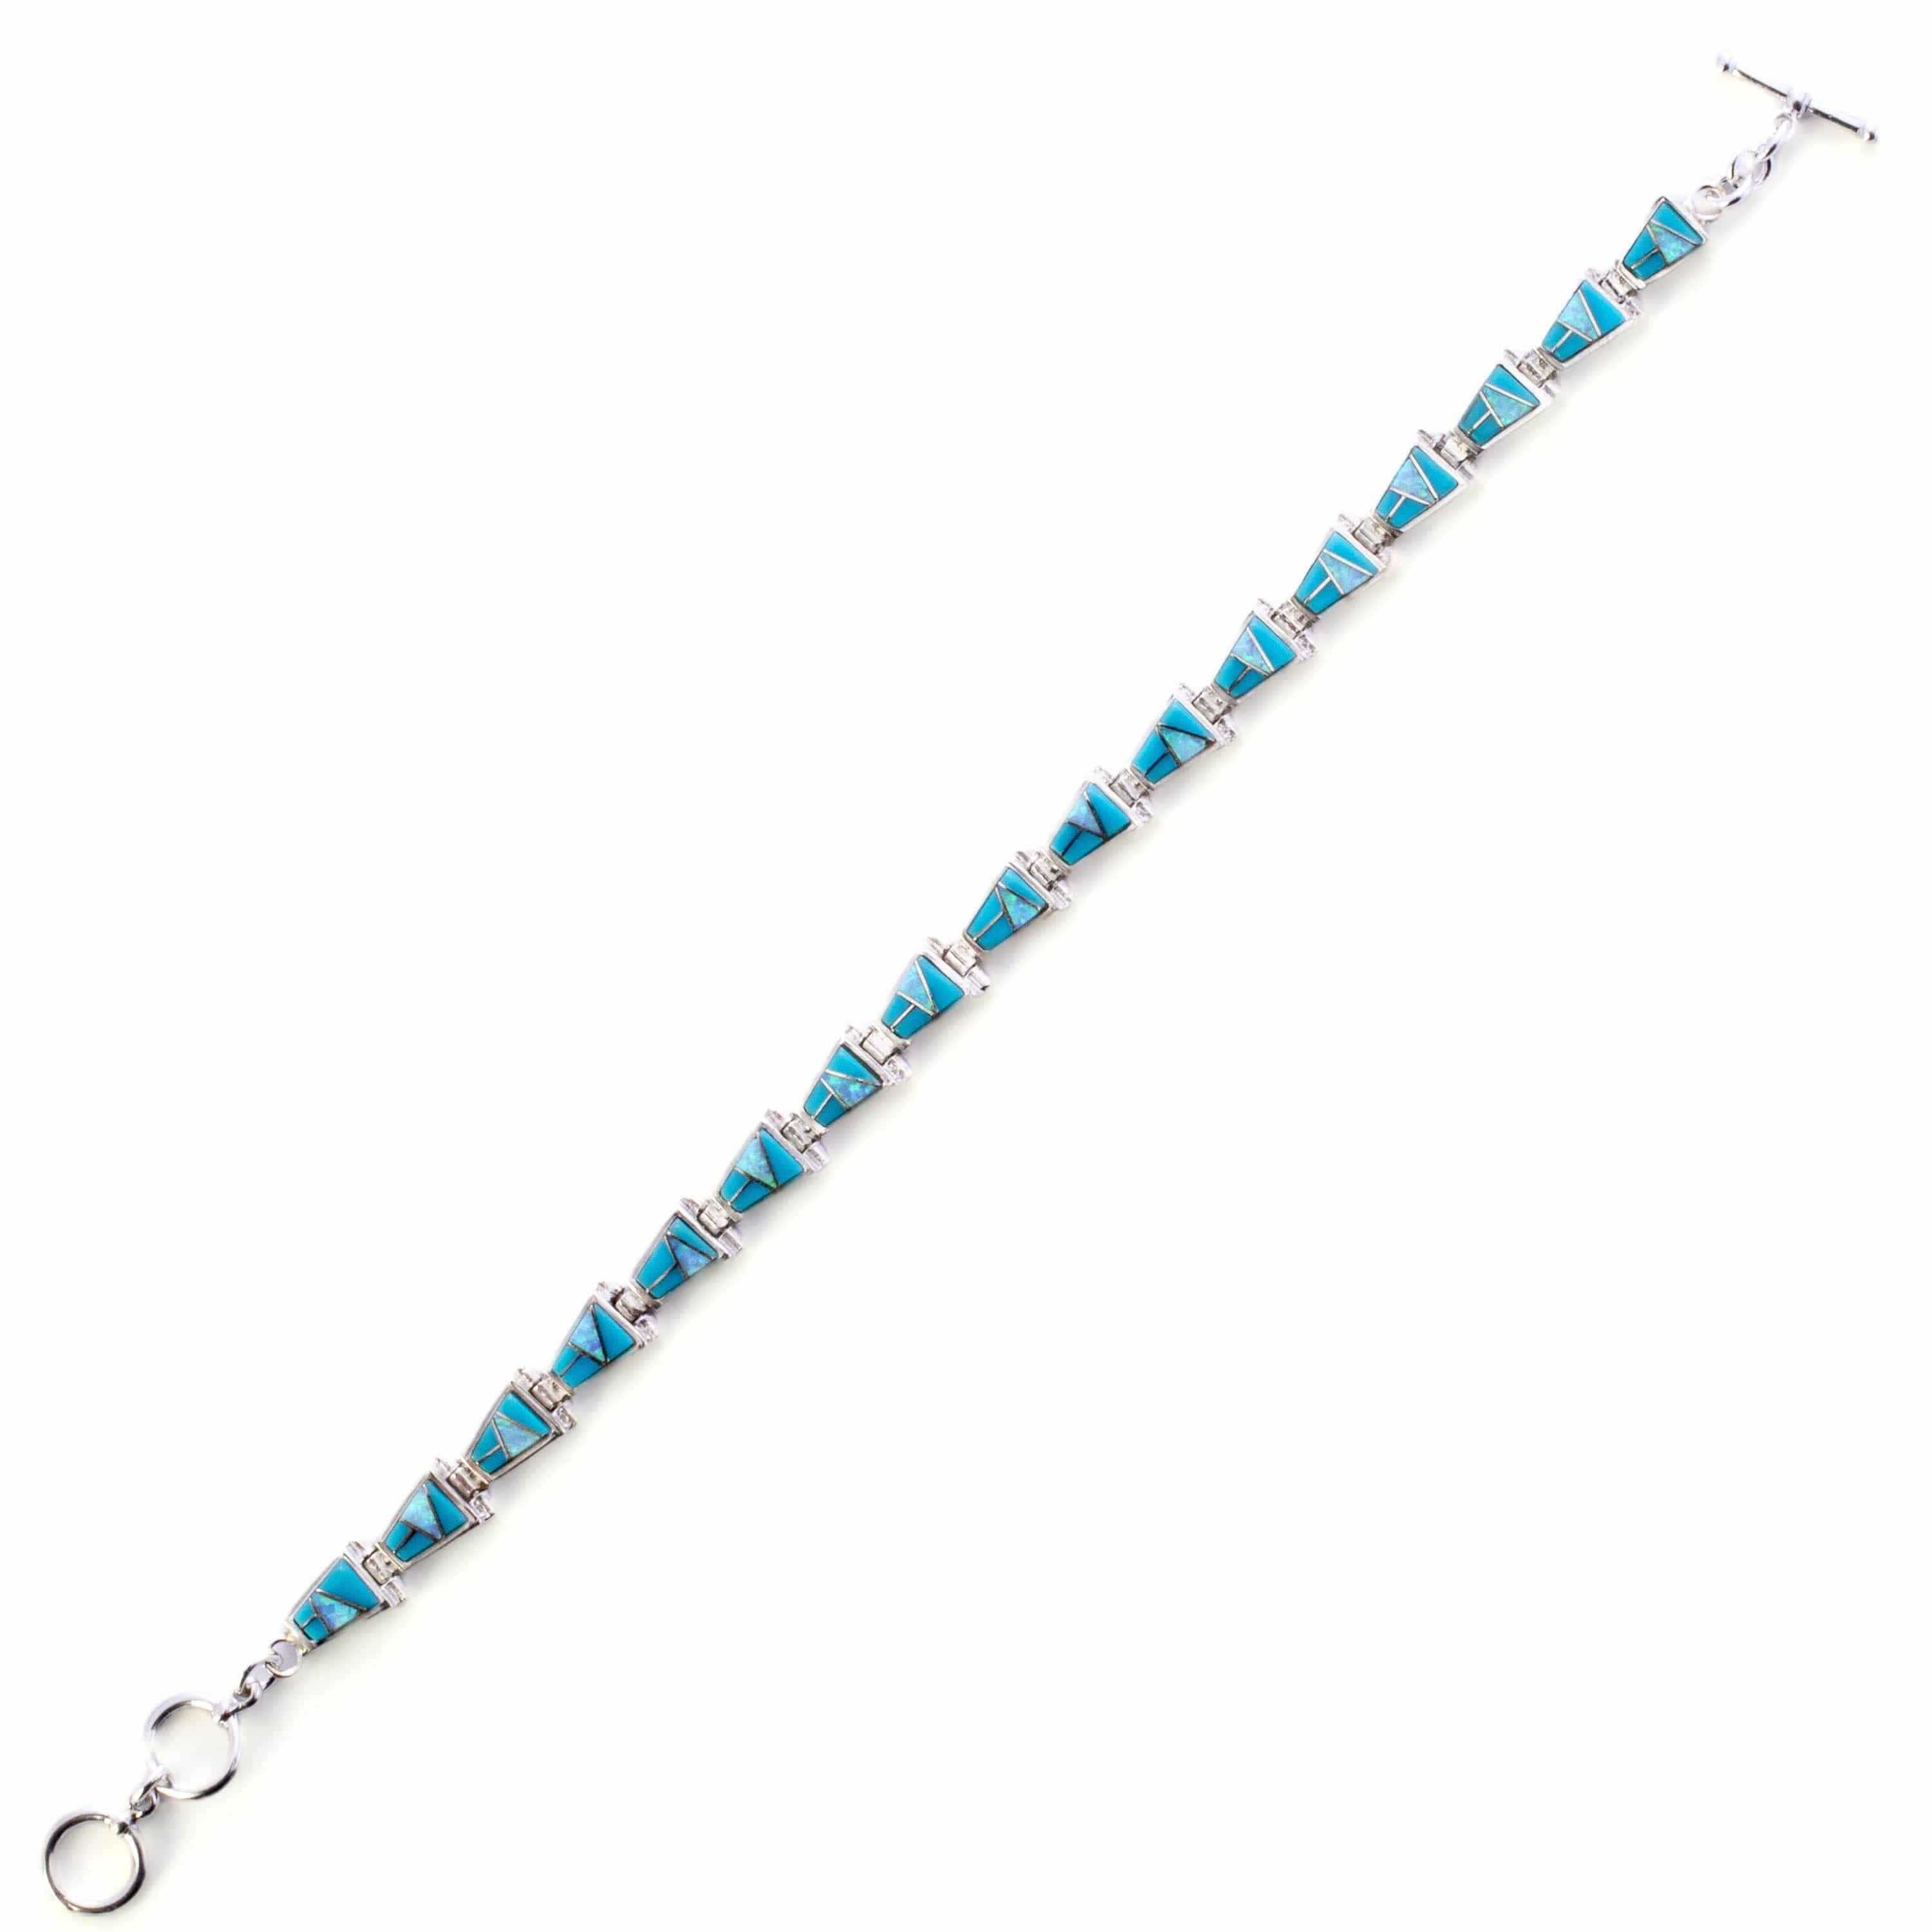 Kalifano Southwest Silver Jewelry Turquoise 925 Sterling Silver Bracelet USA Handmade with Opal Accent NMB.0543.TQ